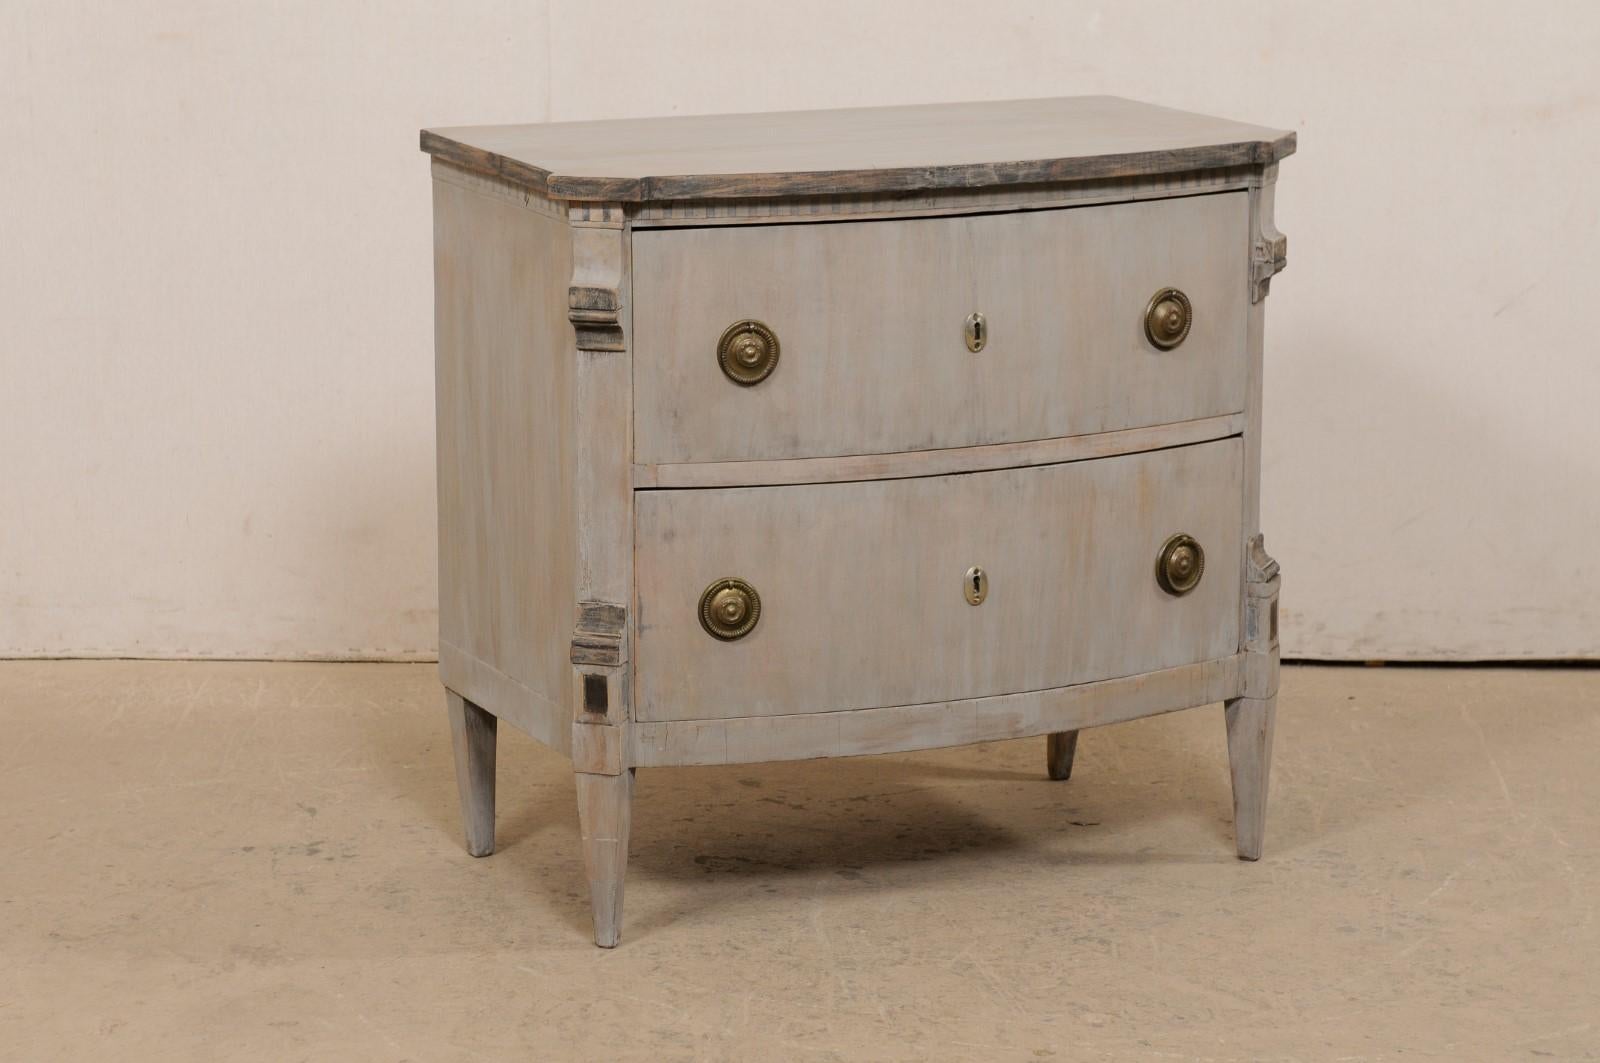 A French raised bow-front chest of drawers from the 19th century. This antique commode from France features a nicely bowed body with top corners having a canted projection, which continues down the carved front side posts an onto the front legs.